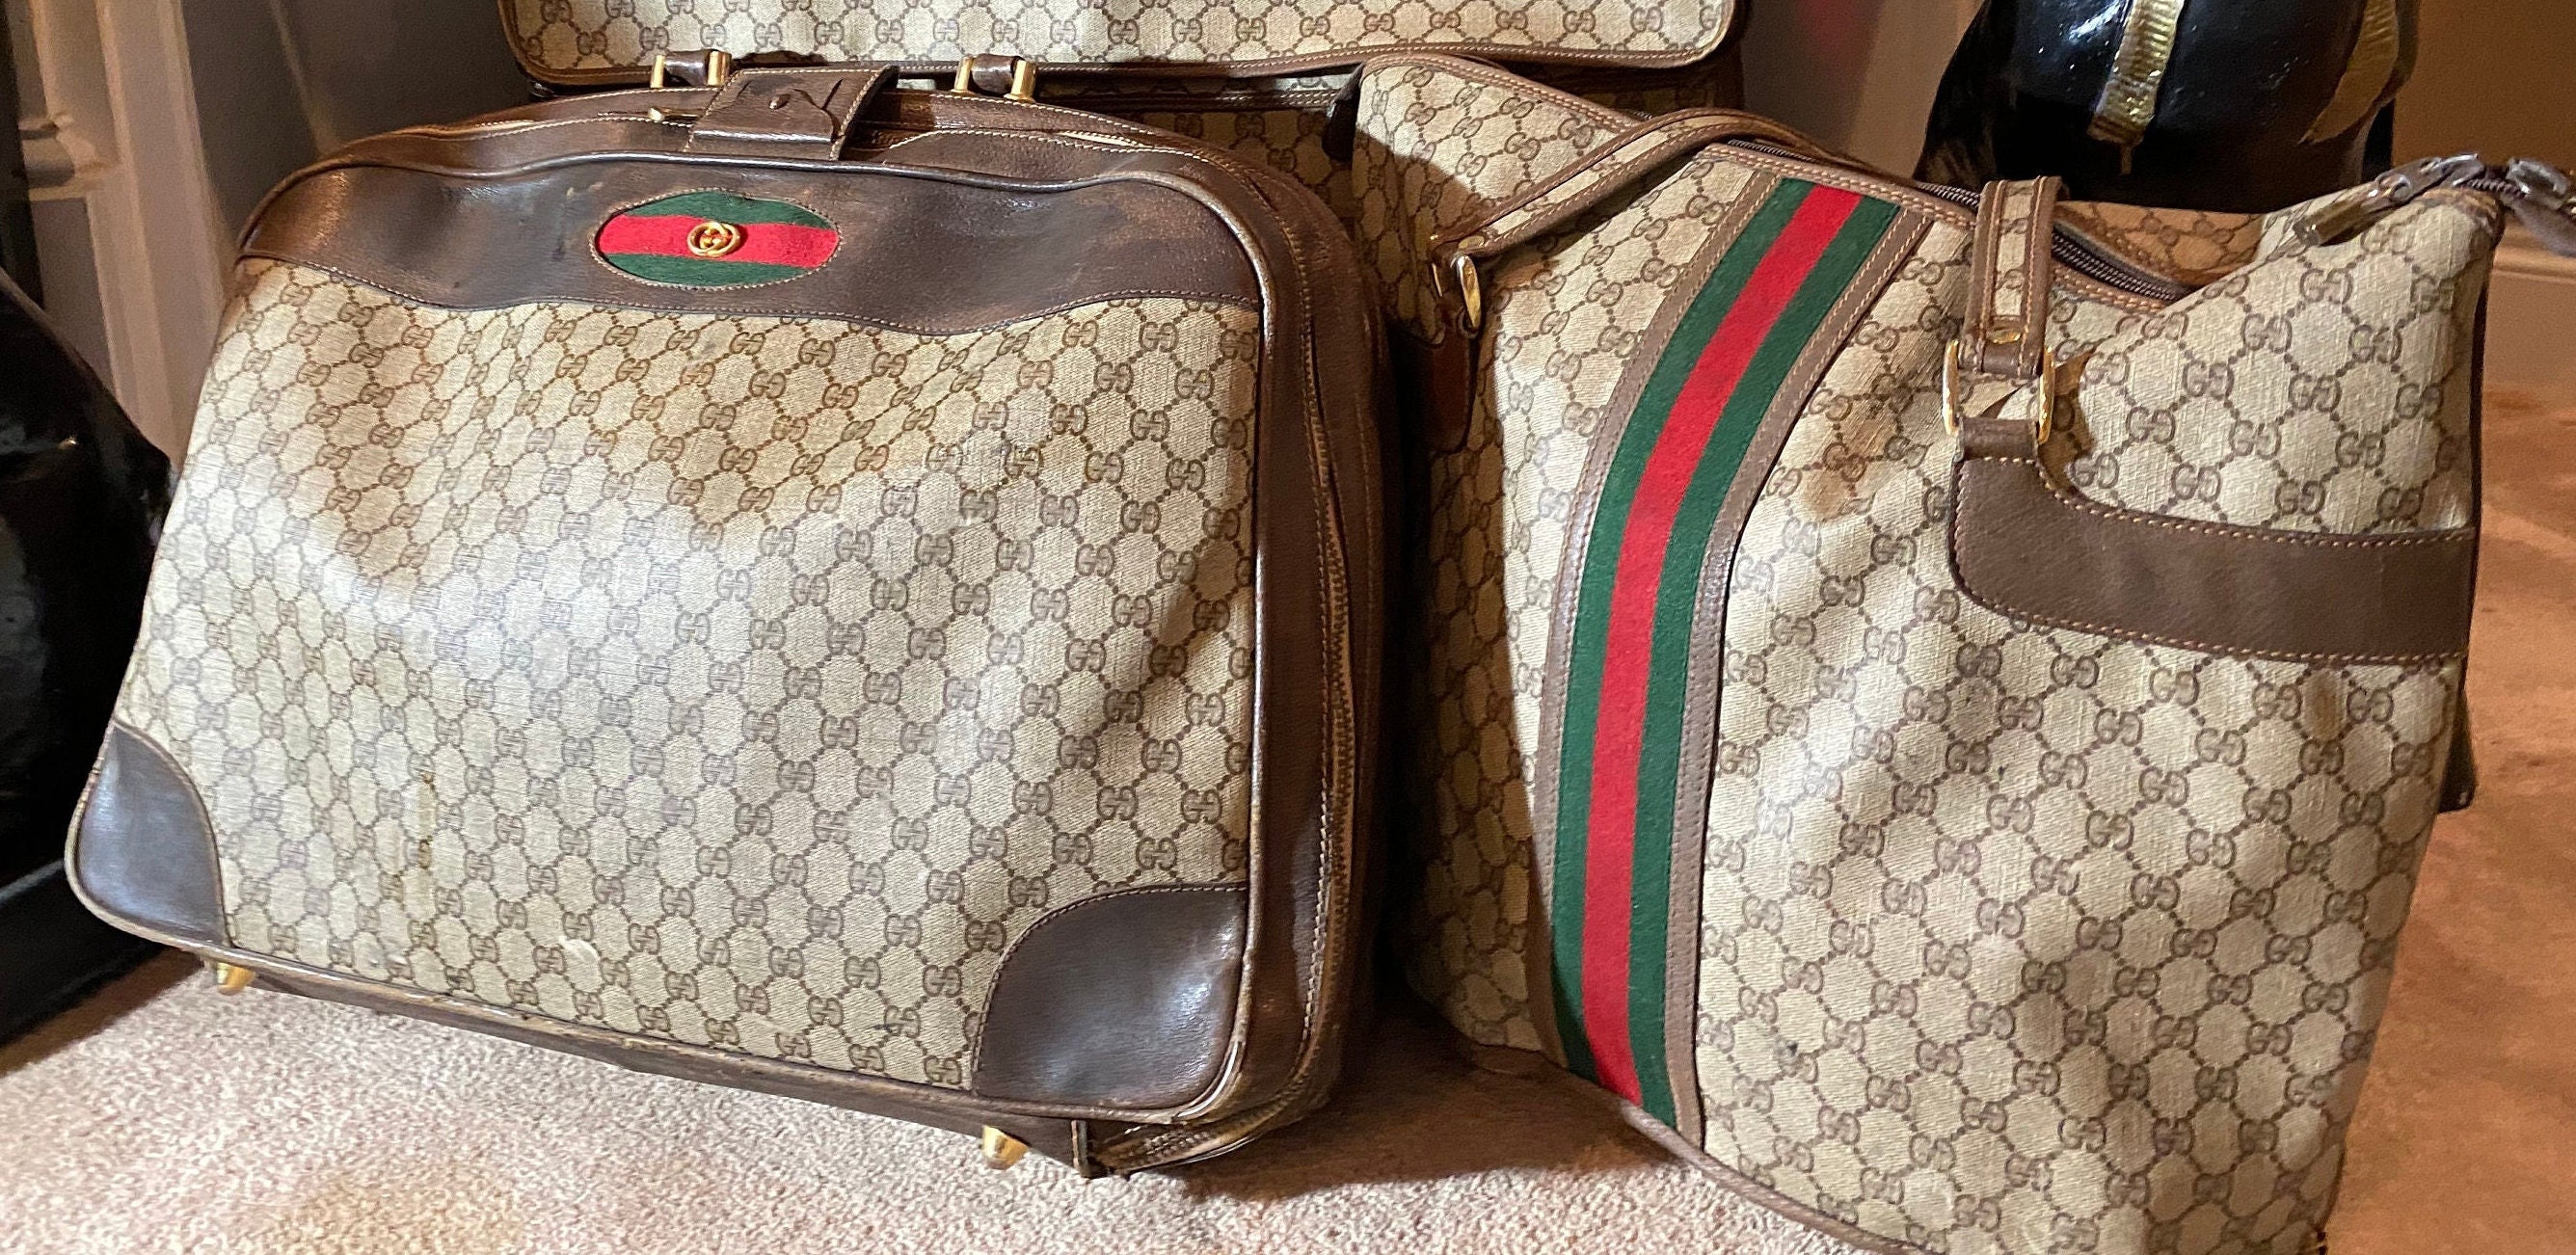 Three Piece Vintage Gucci Luggage, to include two overnight soft